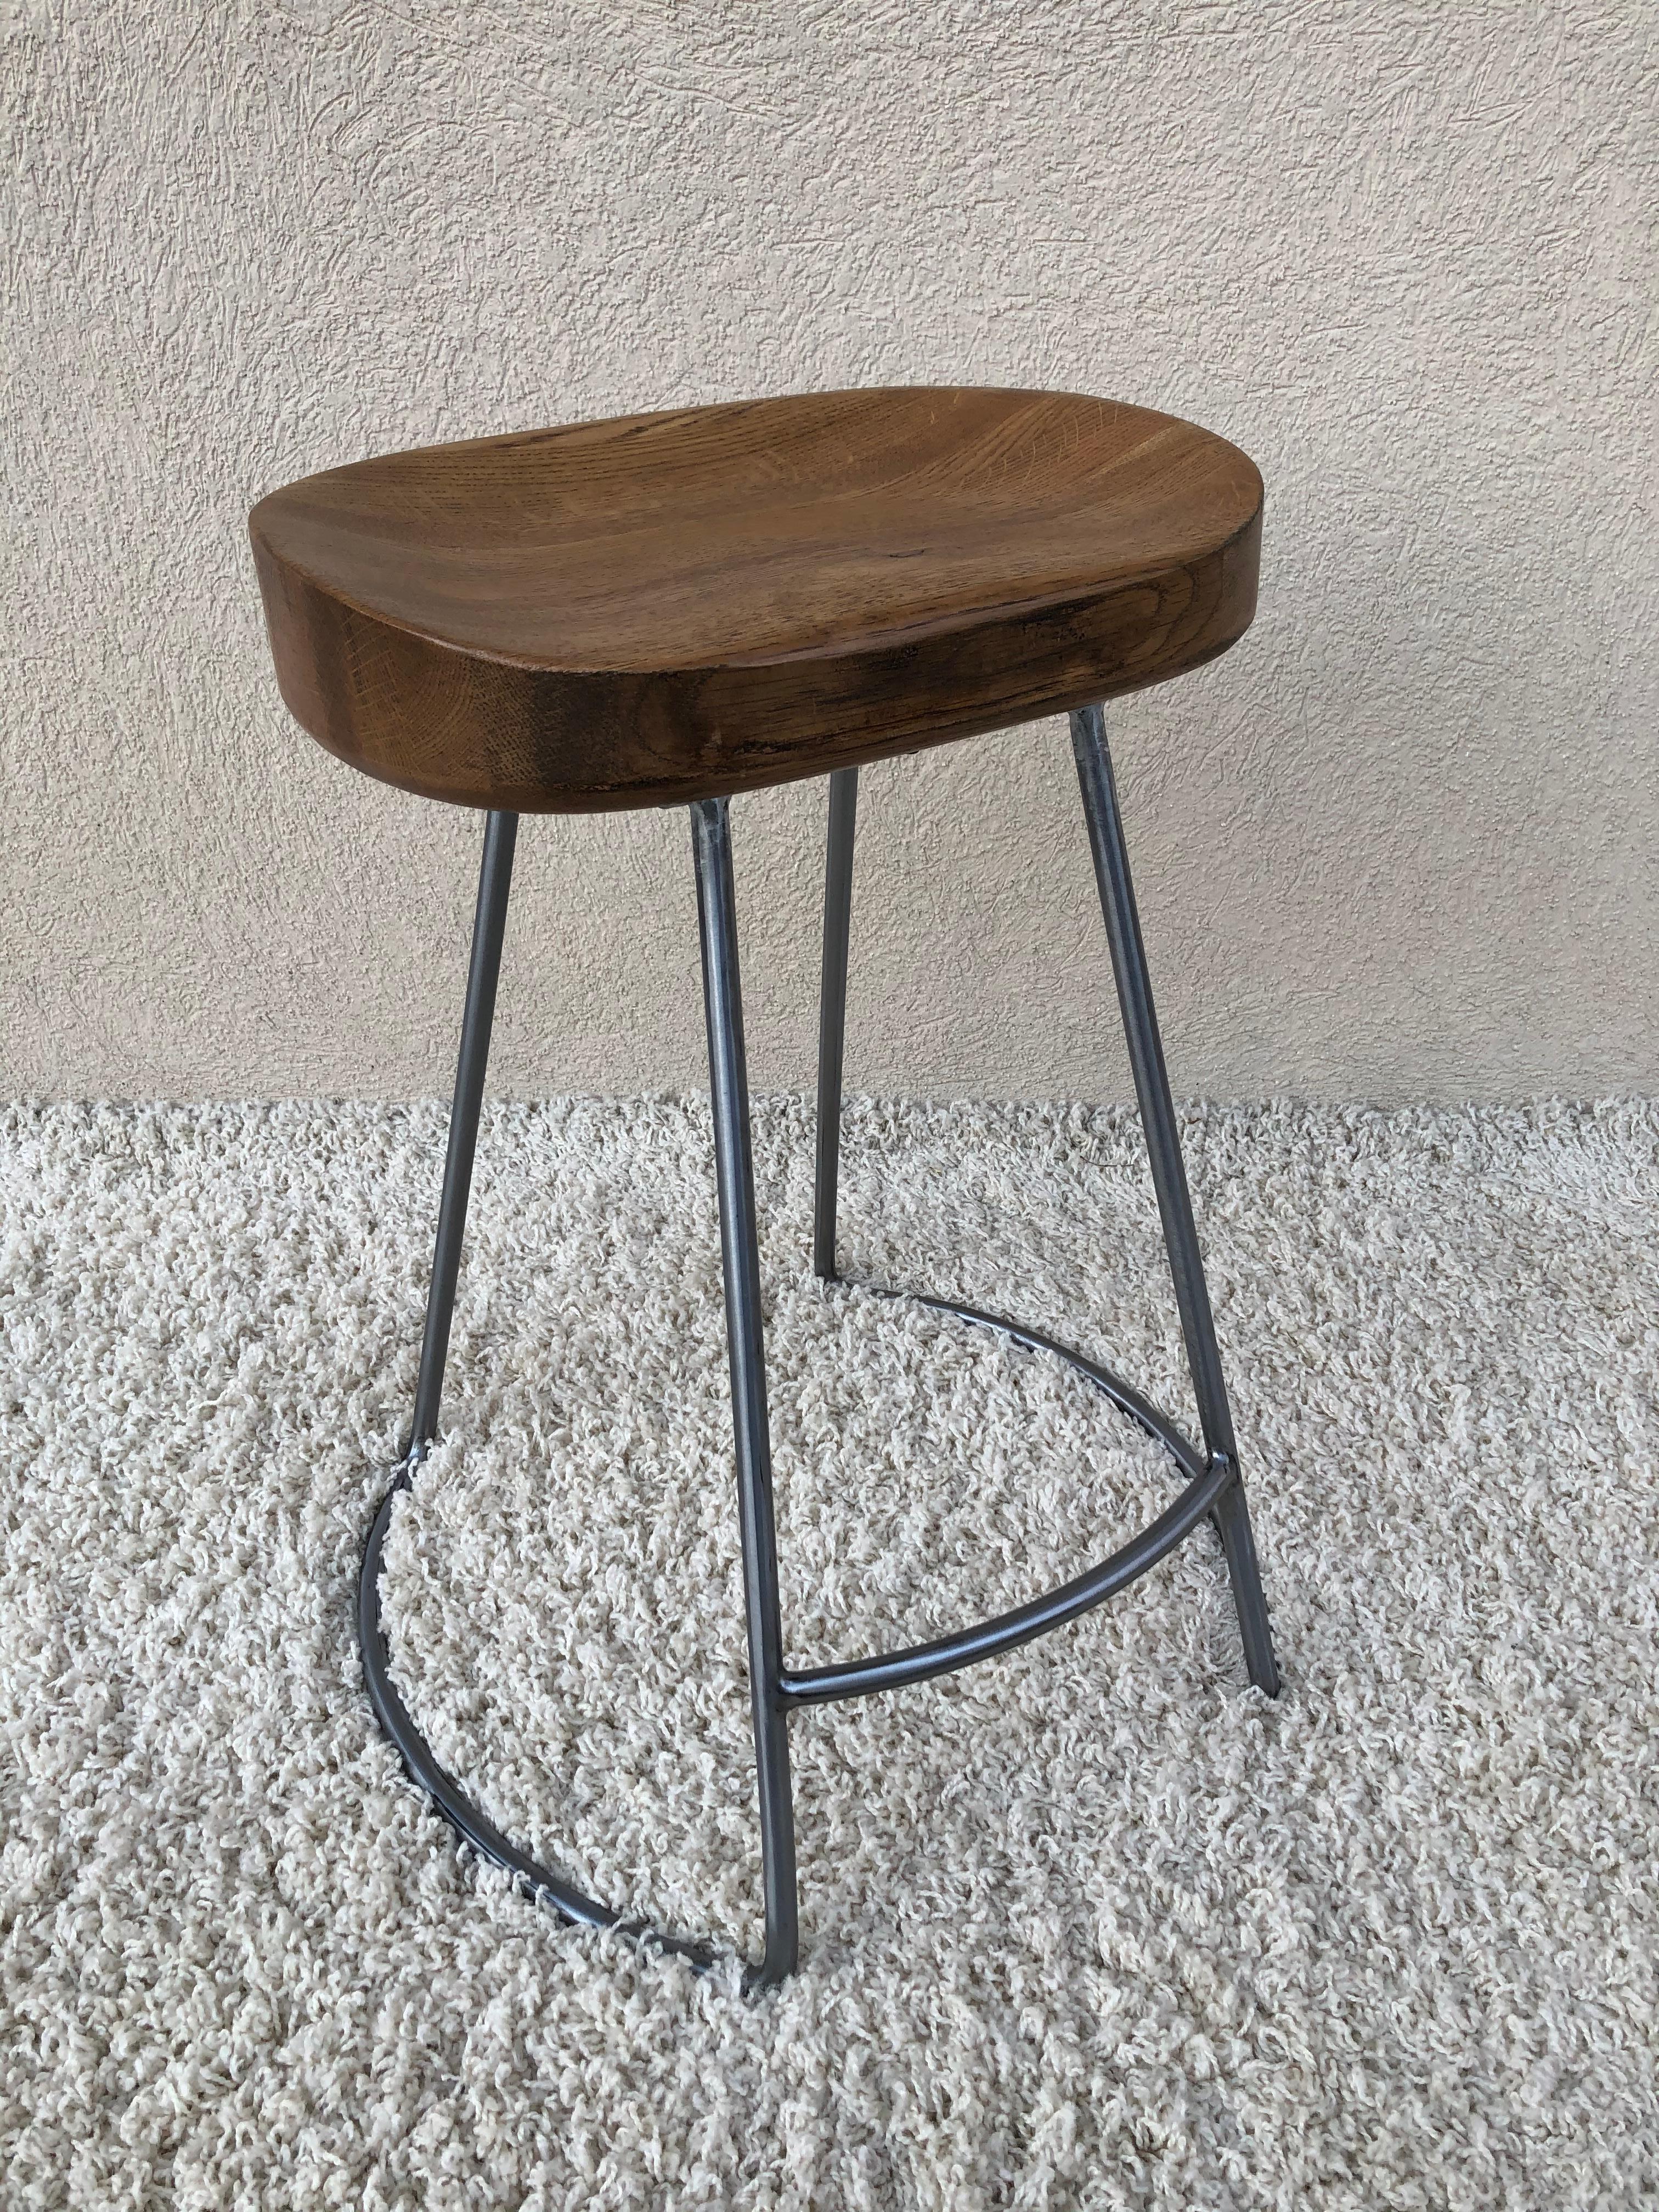 Set of 4 Silver Steel Polish Finish to Bases Solid Oak Top Counter Stools For Sale 6